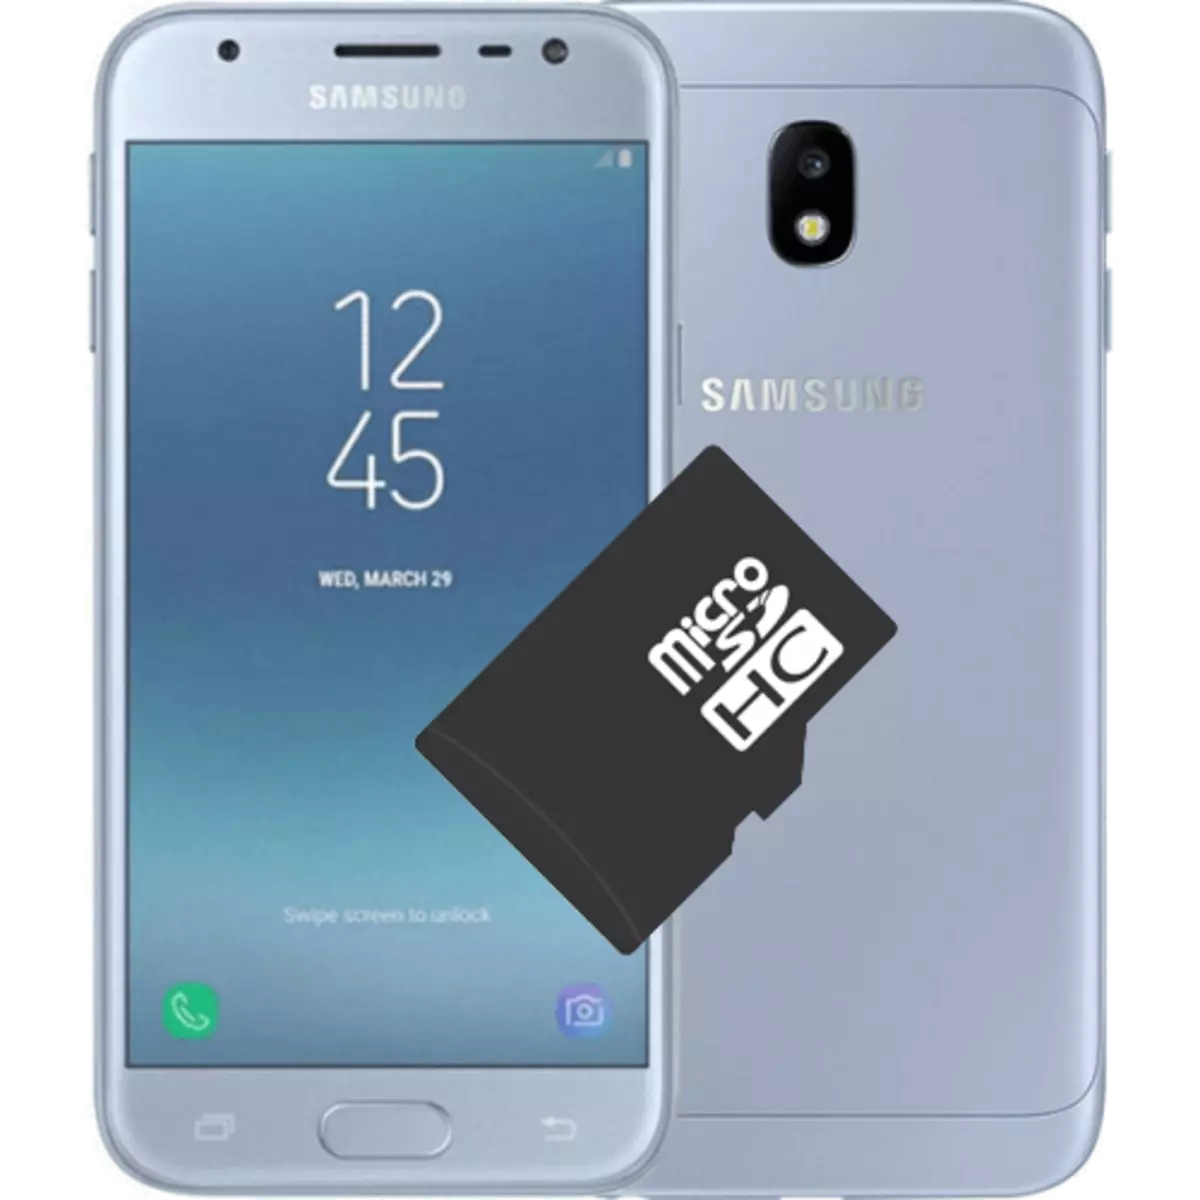 how to insert a memory card into Samsung j3